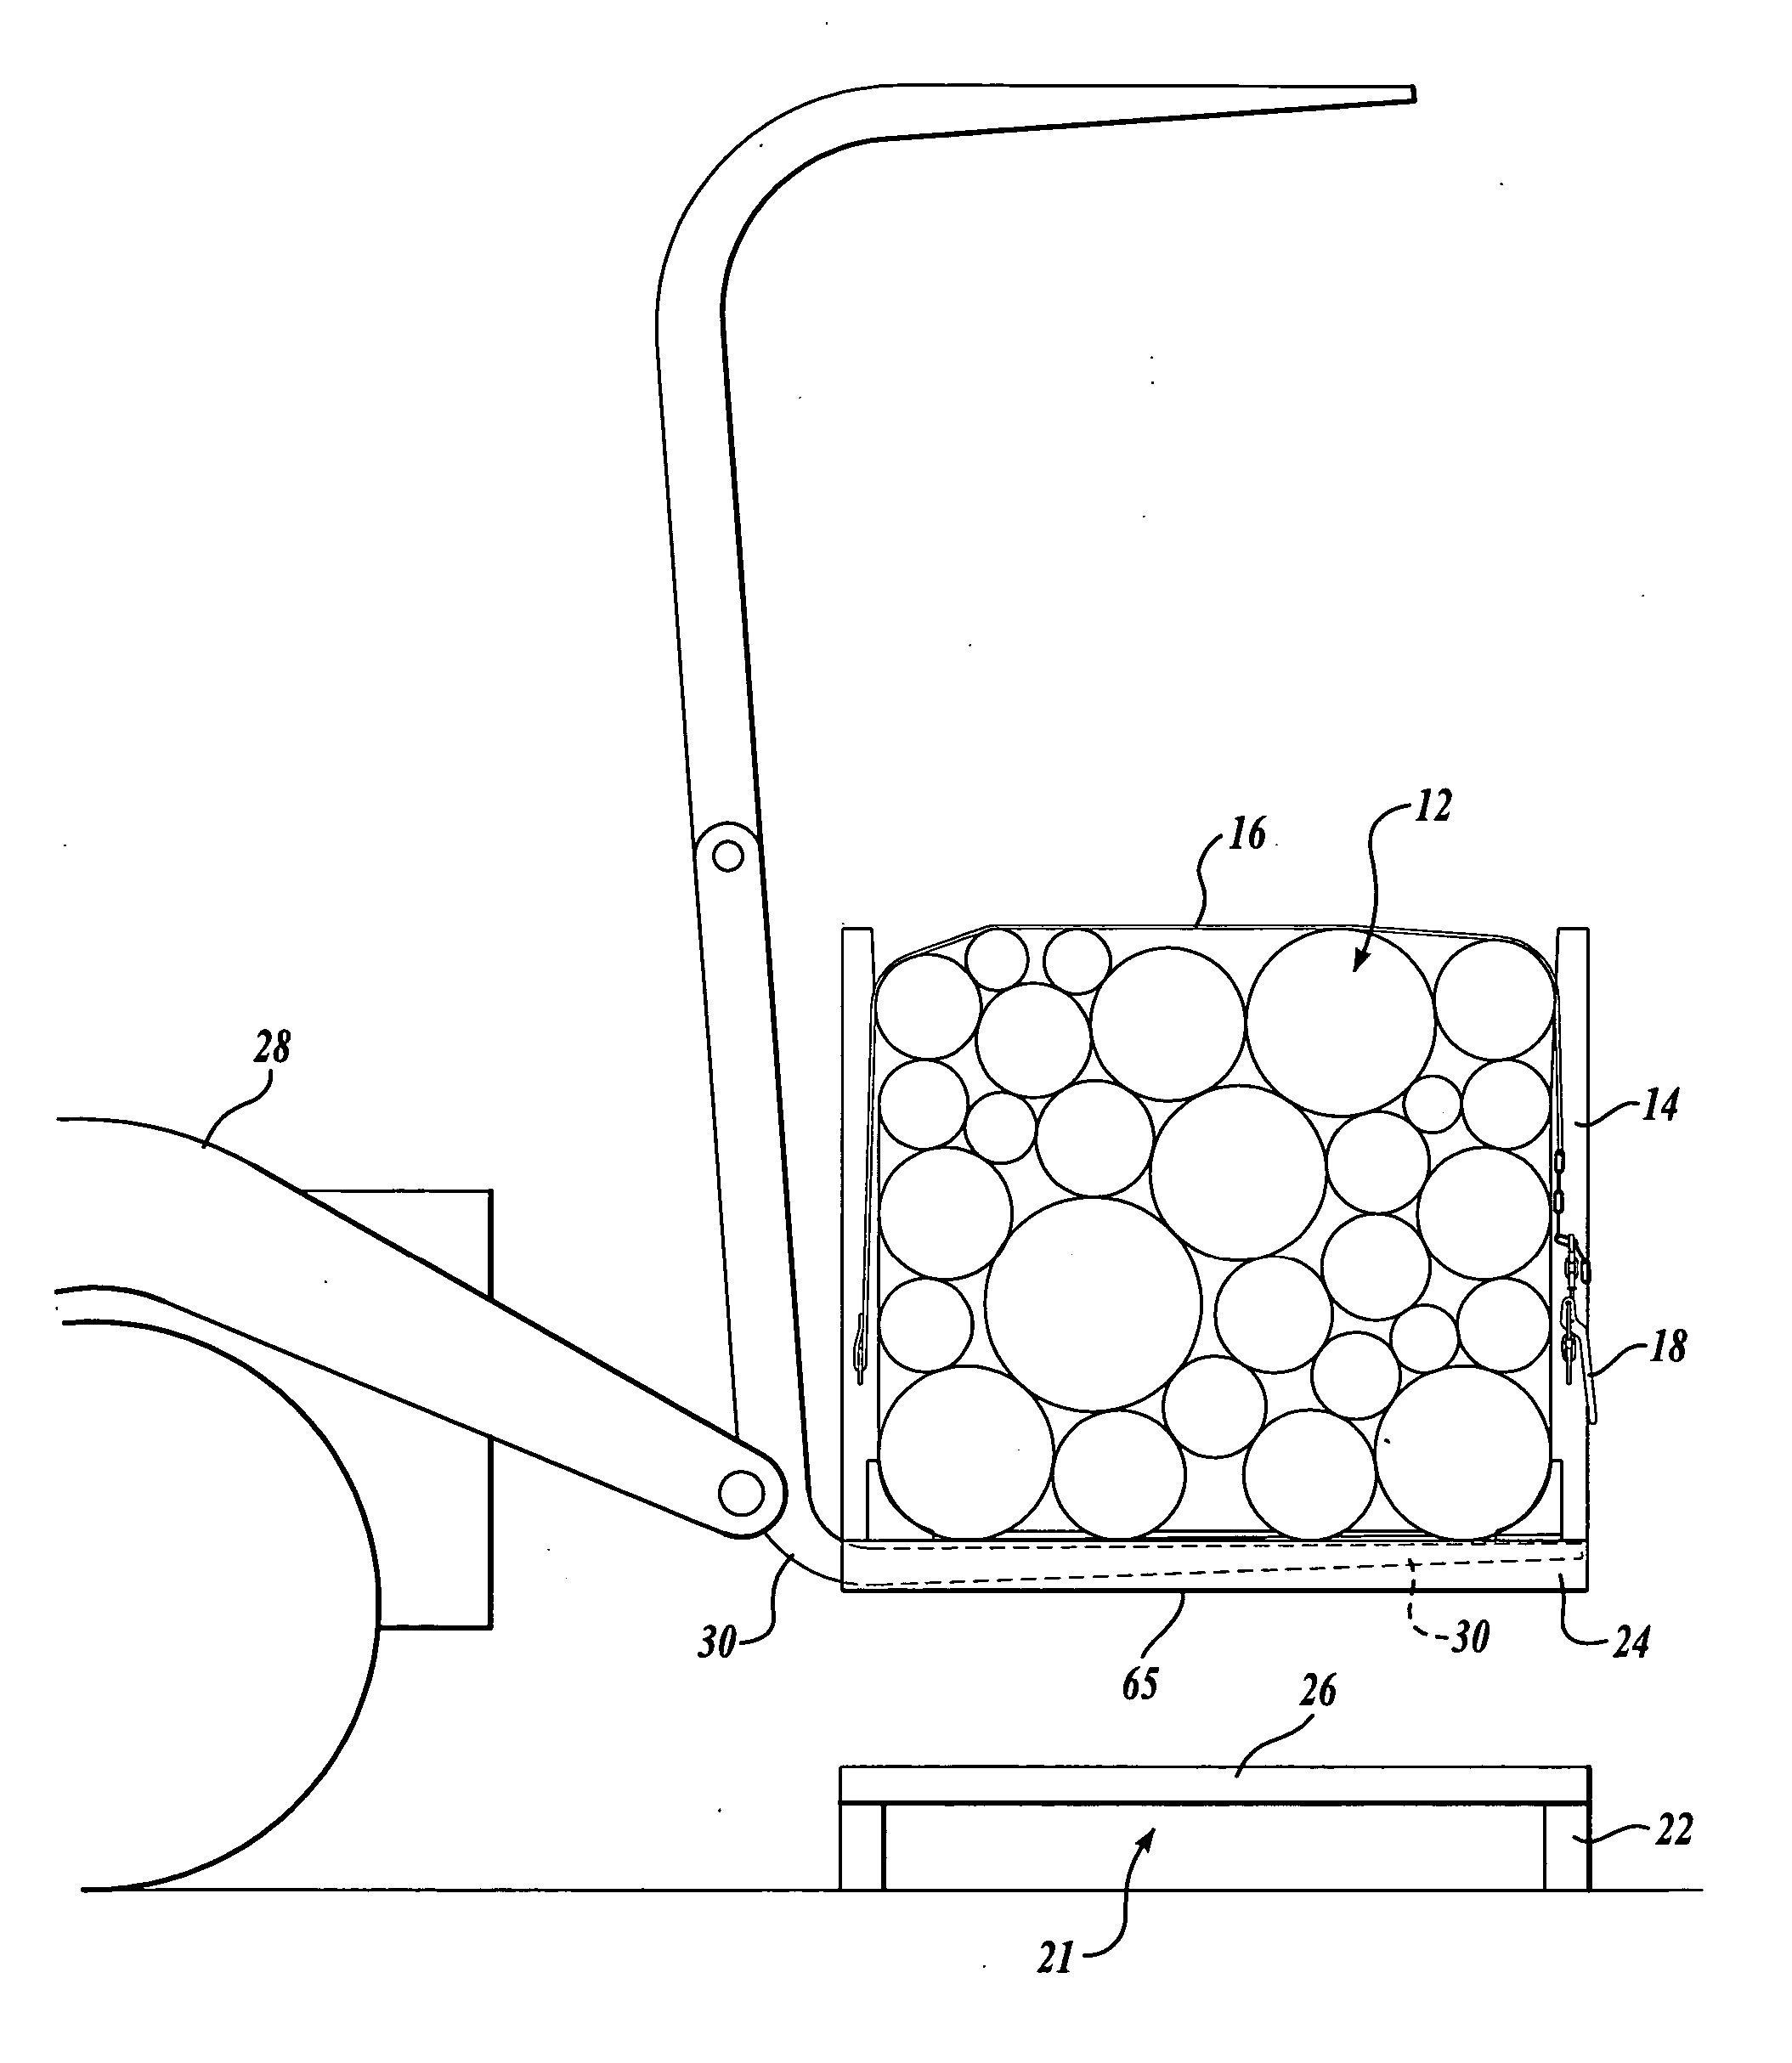 Method, apparatus and system for pre-bunking cut timber and transporting wood residuals